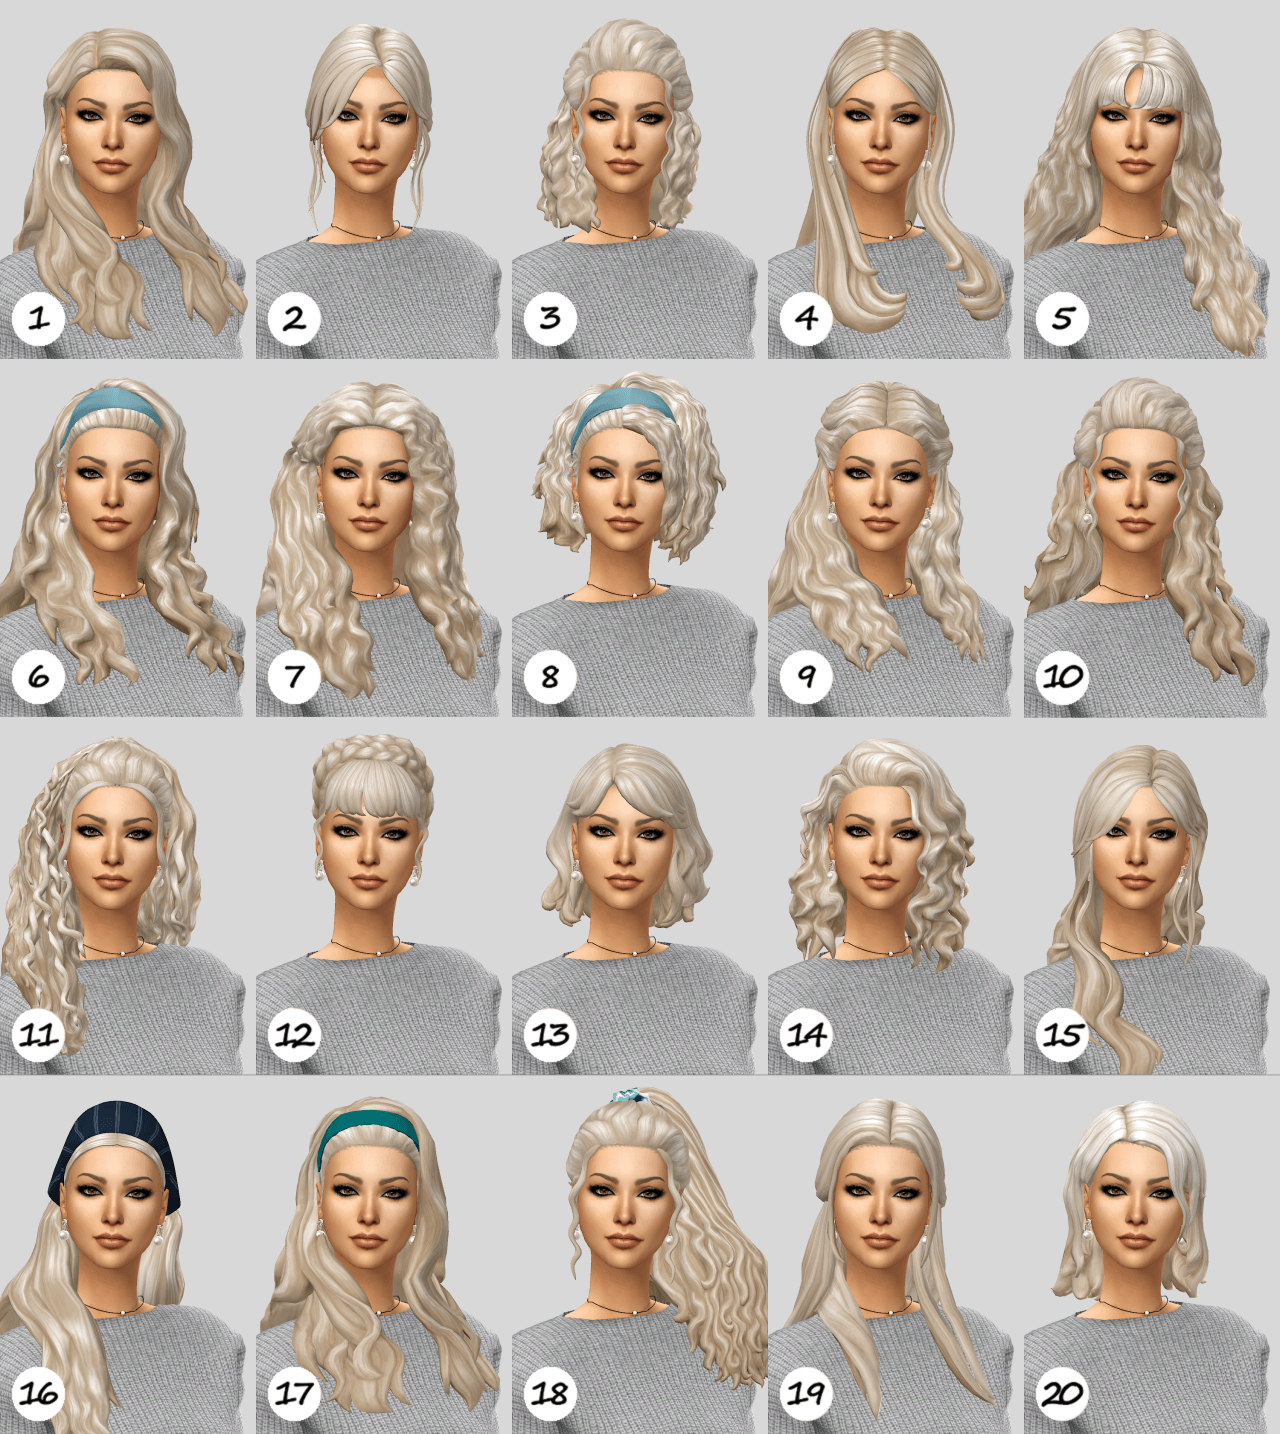 Sims 4 Natural Hair Recolor Dump Archives The Sims Book